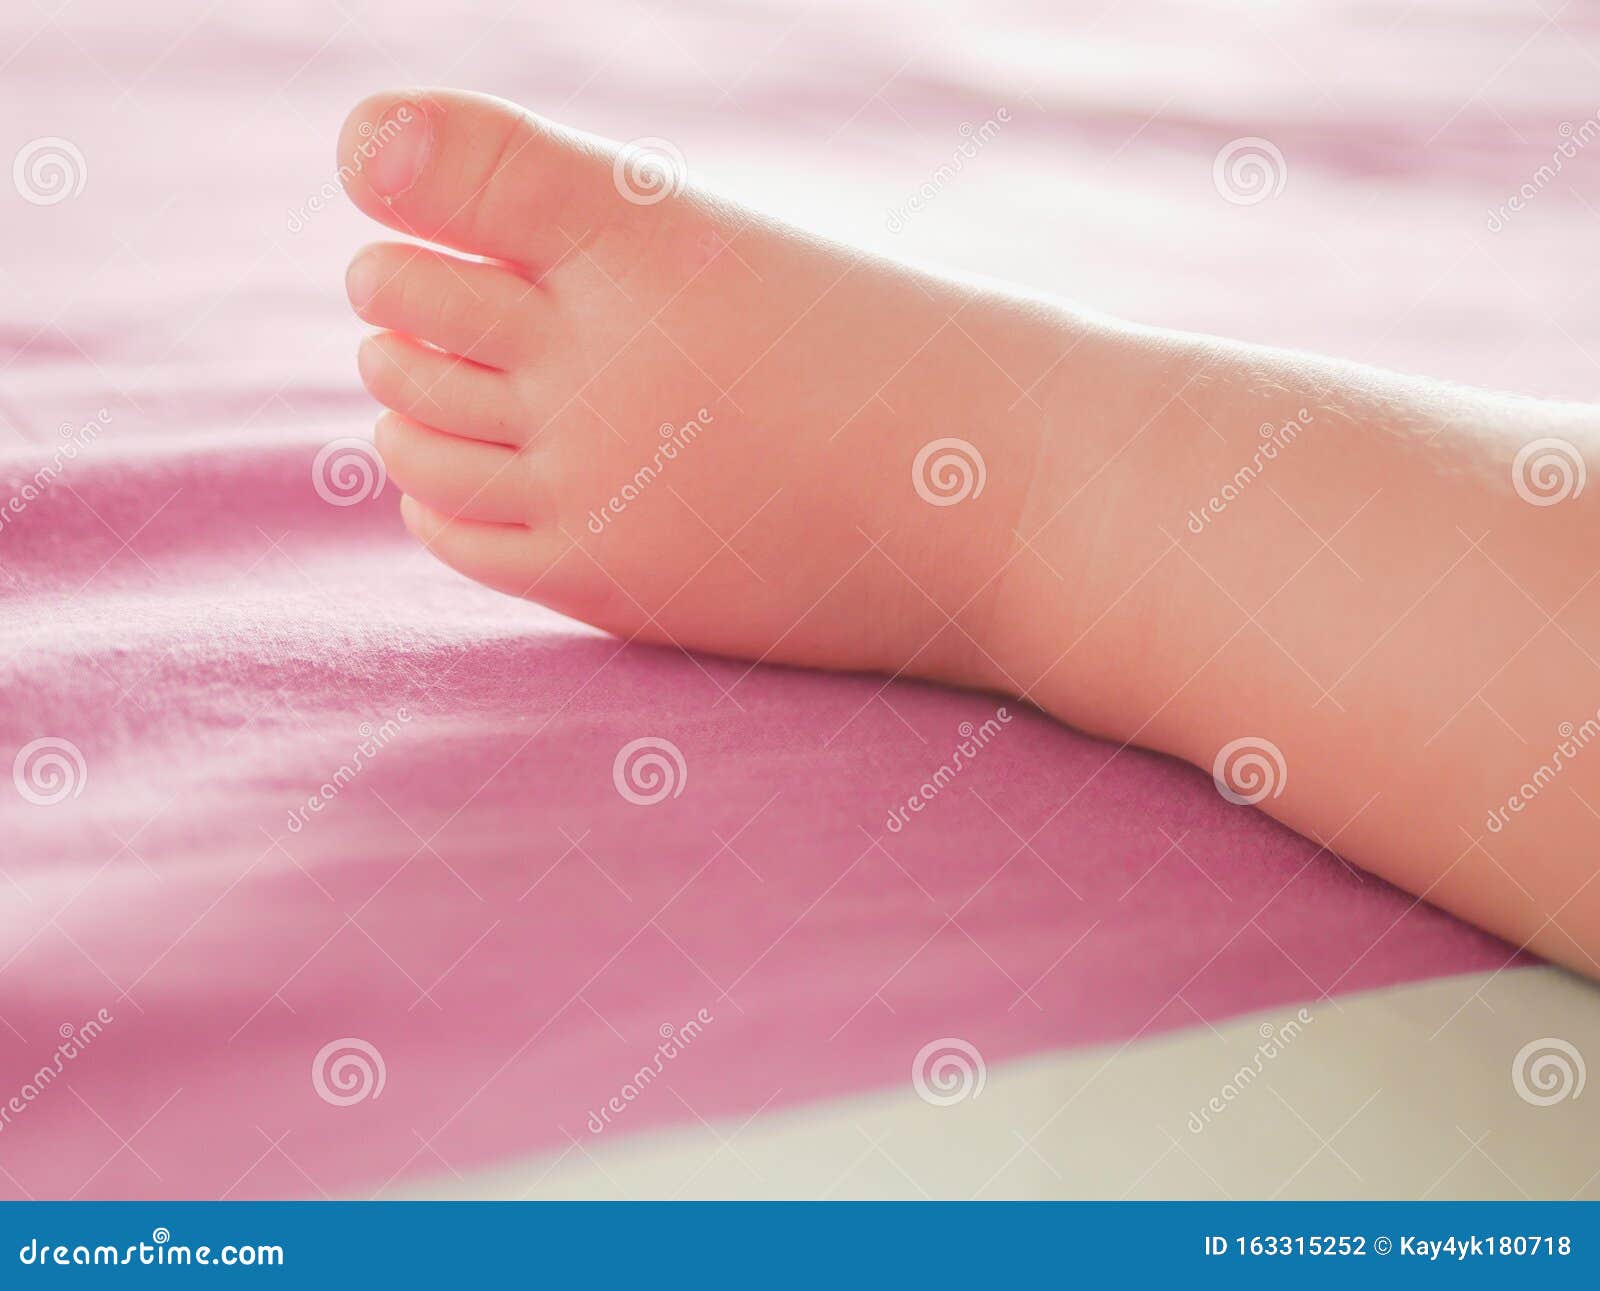 little baby feet. theres nothing quite so sweet as tiny little baby feet. little baby boy on bed. close up. space for copy